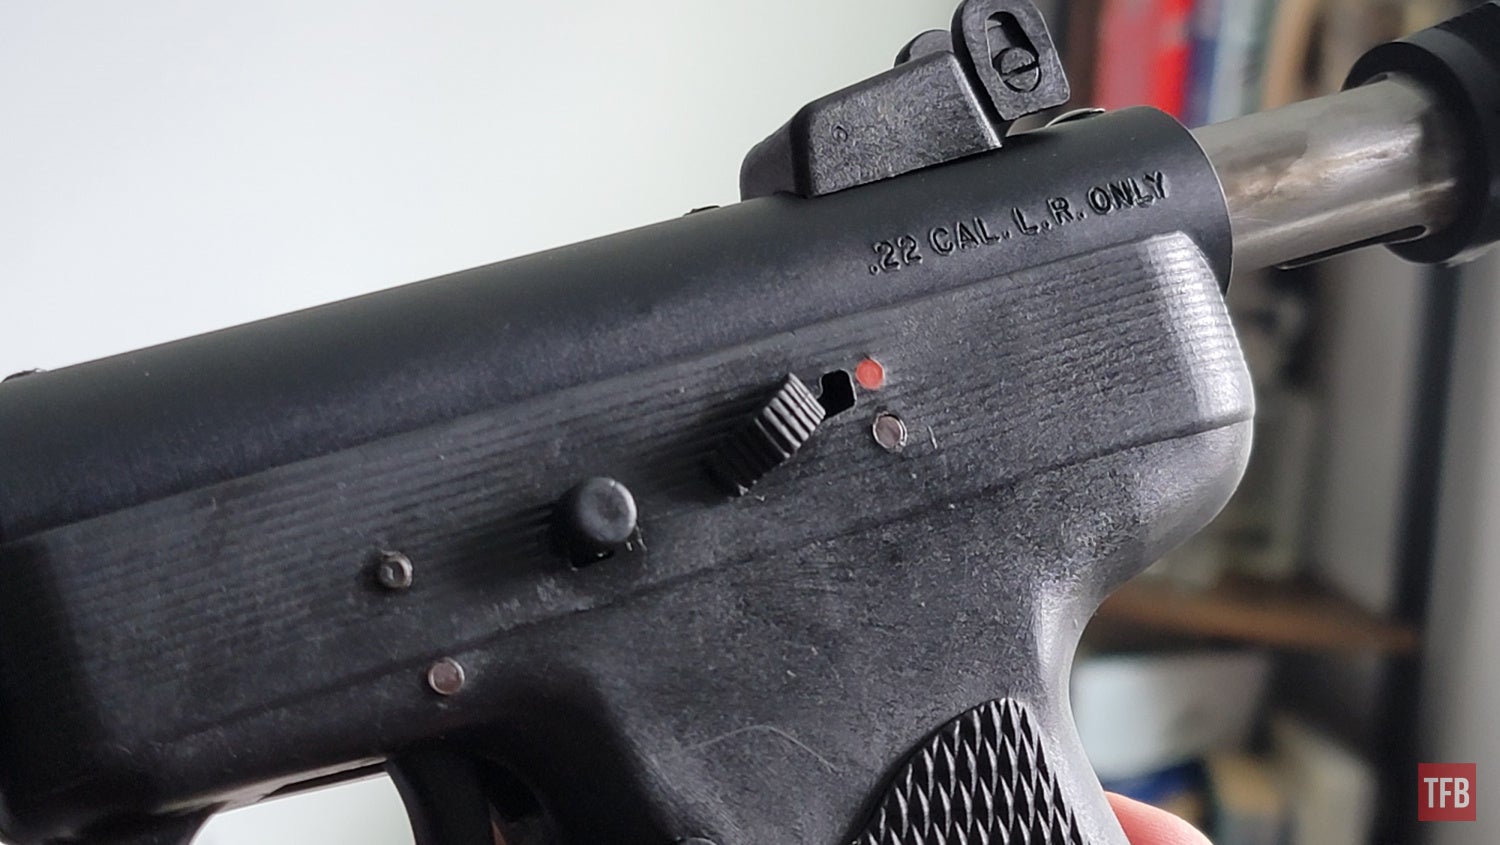  The barrels rifling and bore were in pristine condition and the internals of the pistol looked like they had been freshly cleaned and lubed so it was good to go to the range right away.